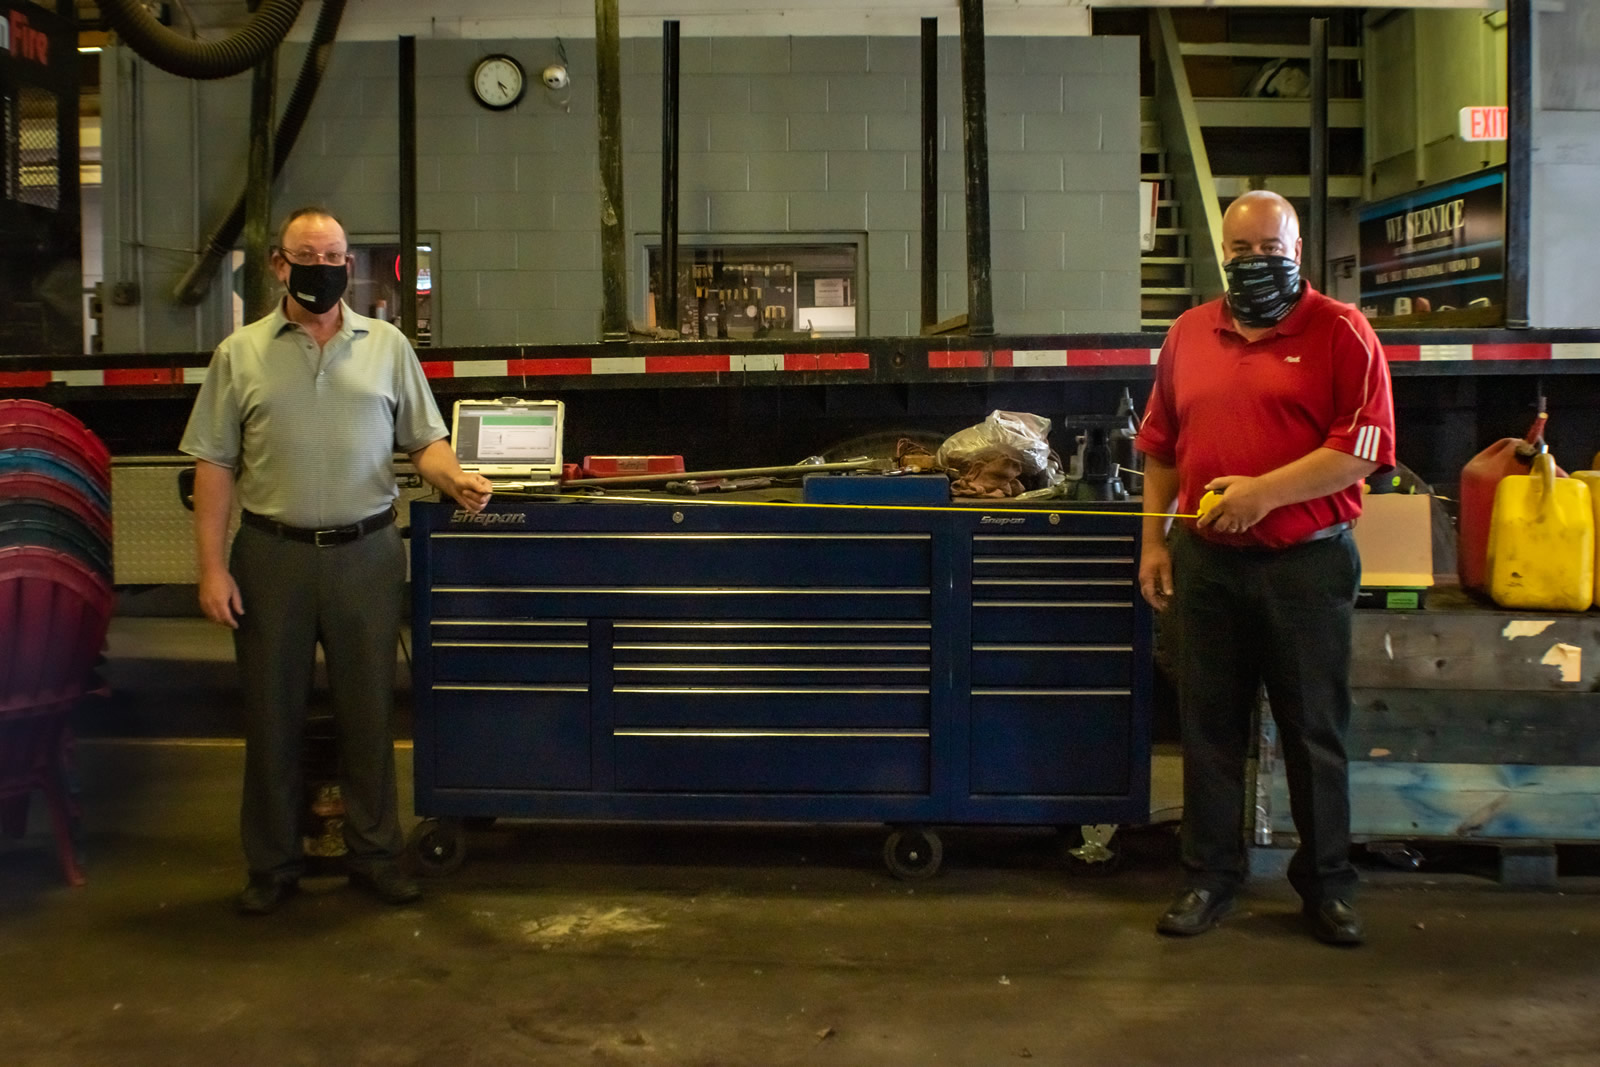 Owners John and Steve encourage employees and guests to remain one toolbox width apart.